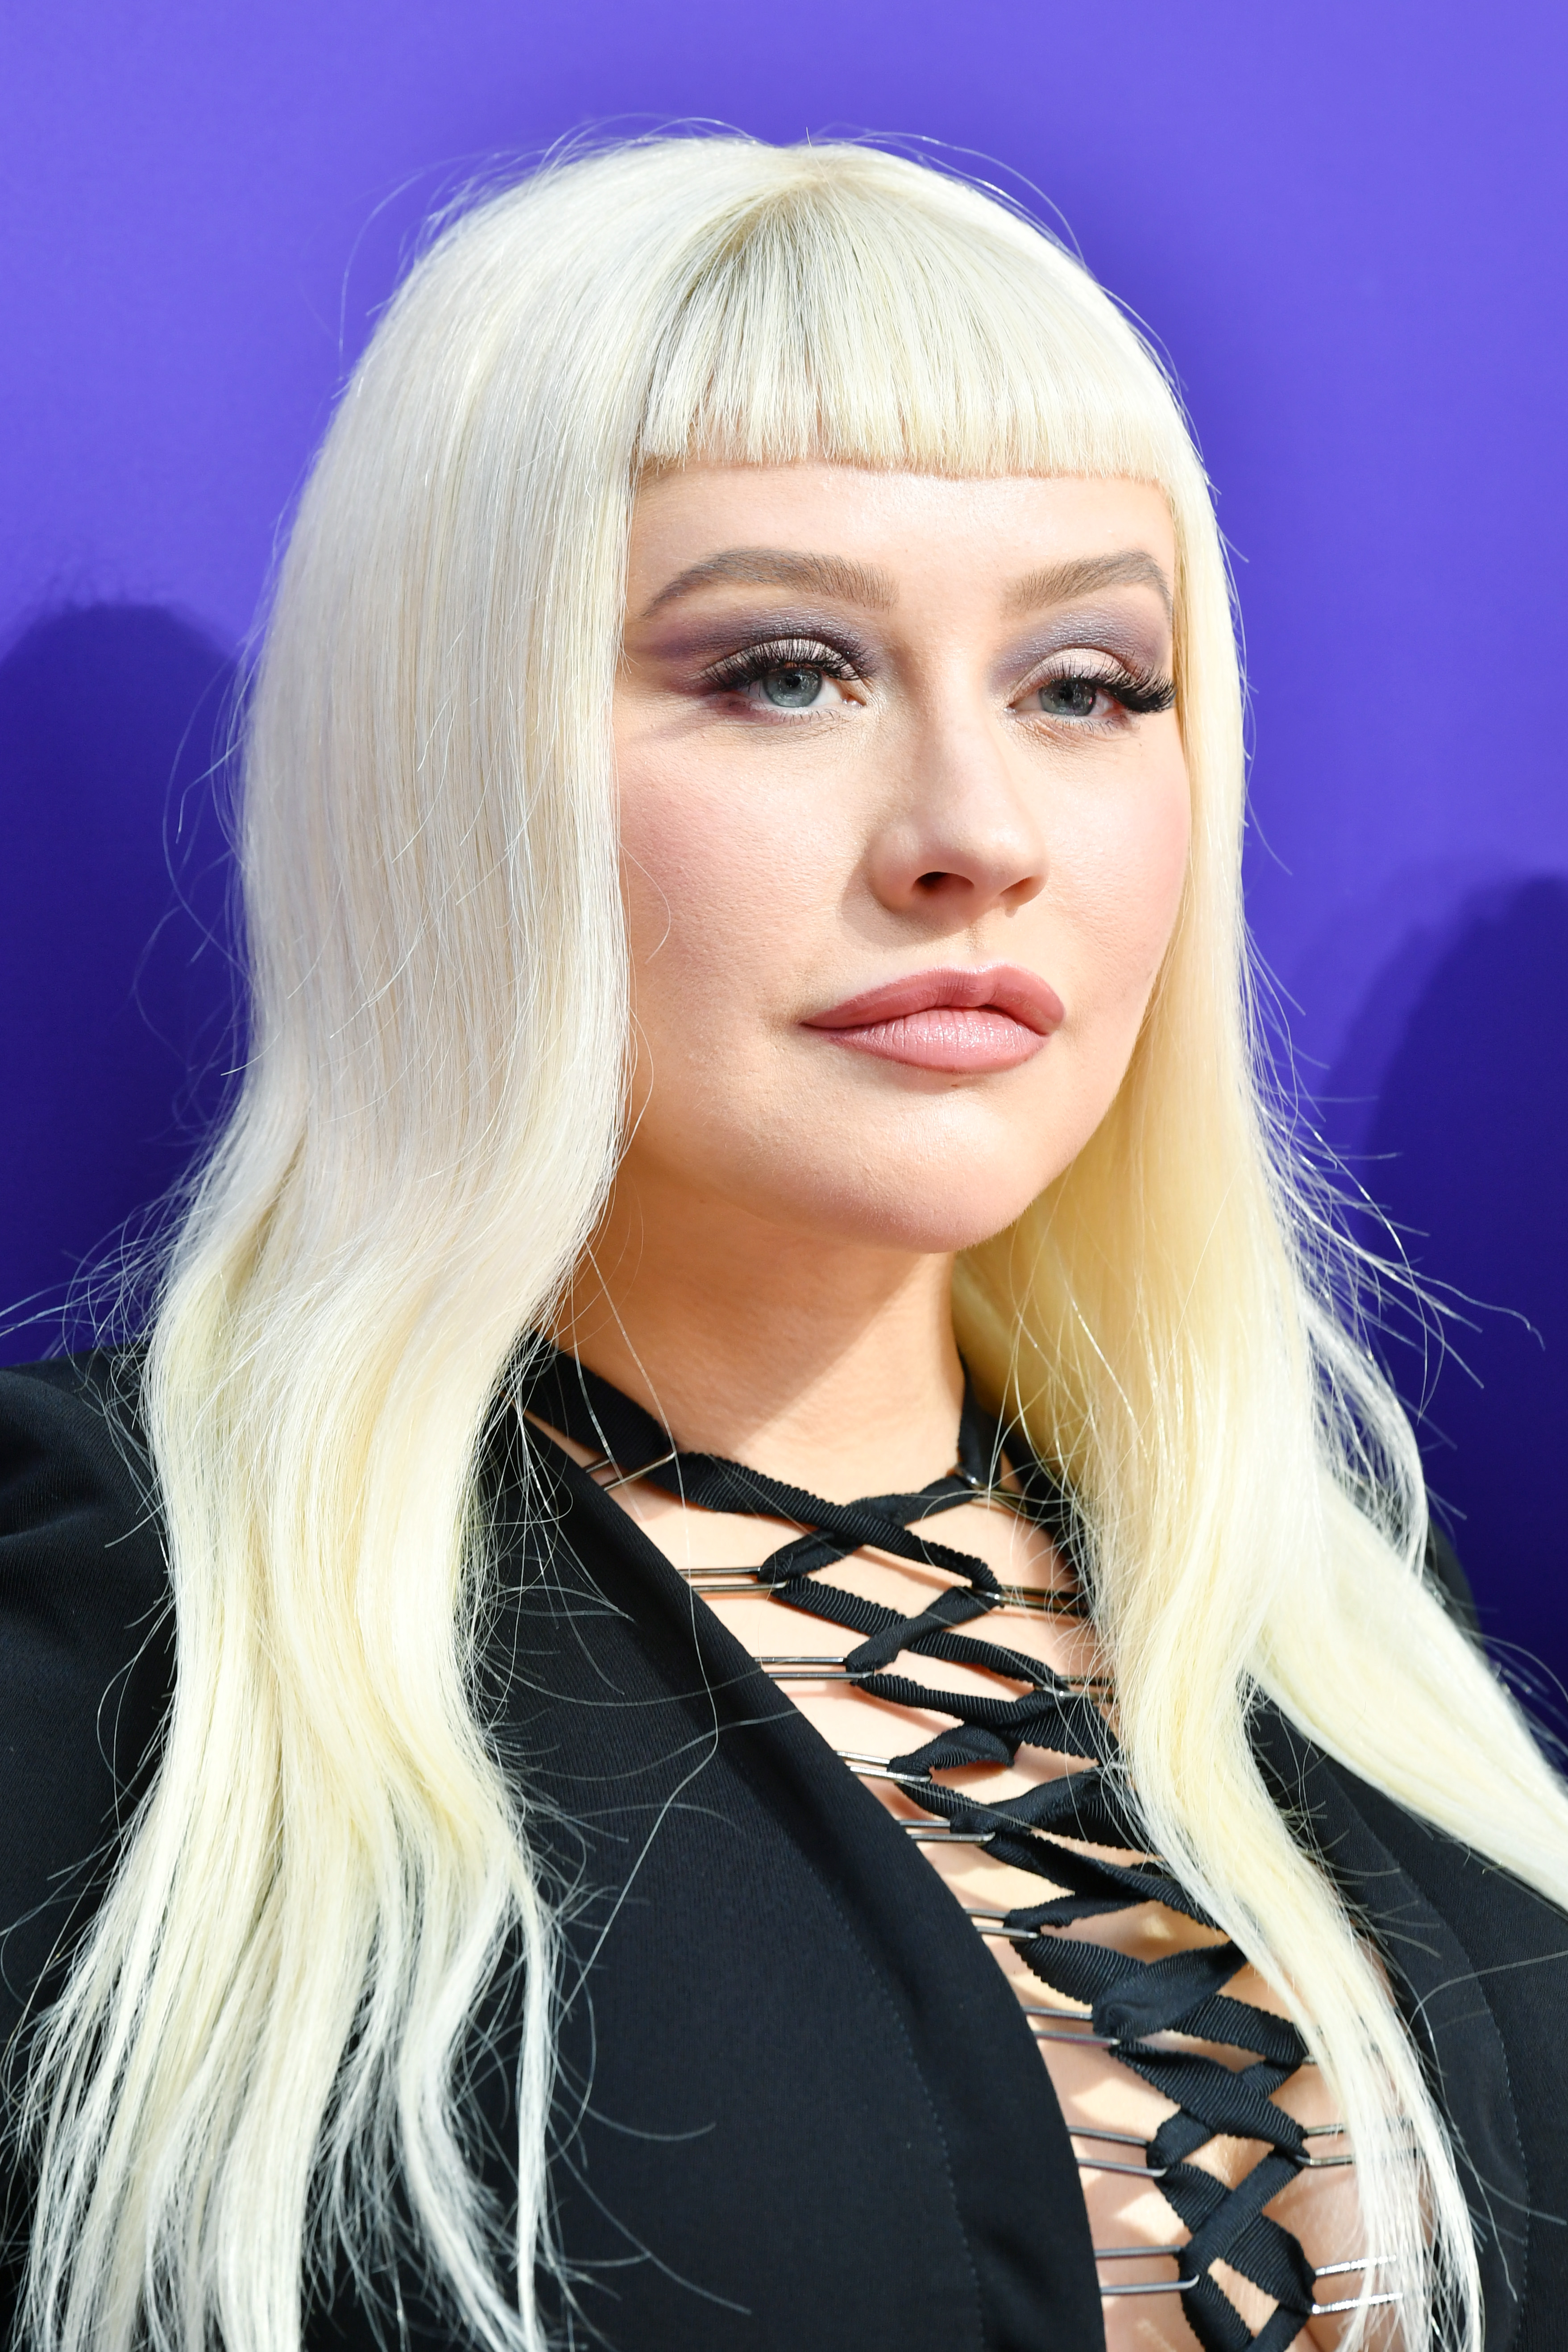 Christina Aguilera attends the premiere of "The Addams Family," 2019 | Source: Getty Images